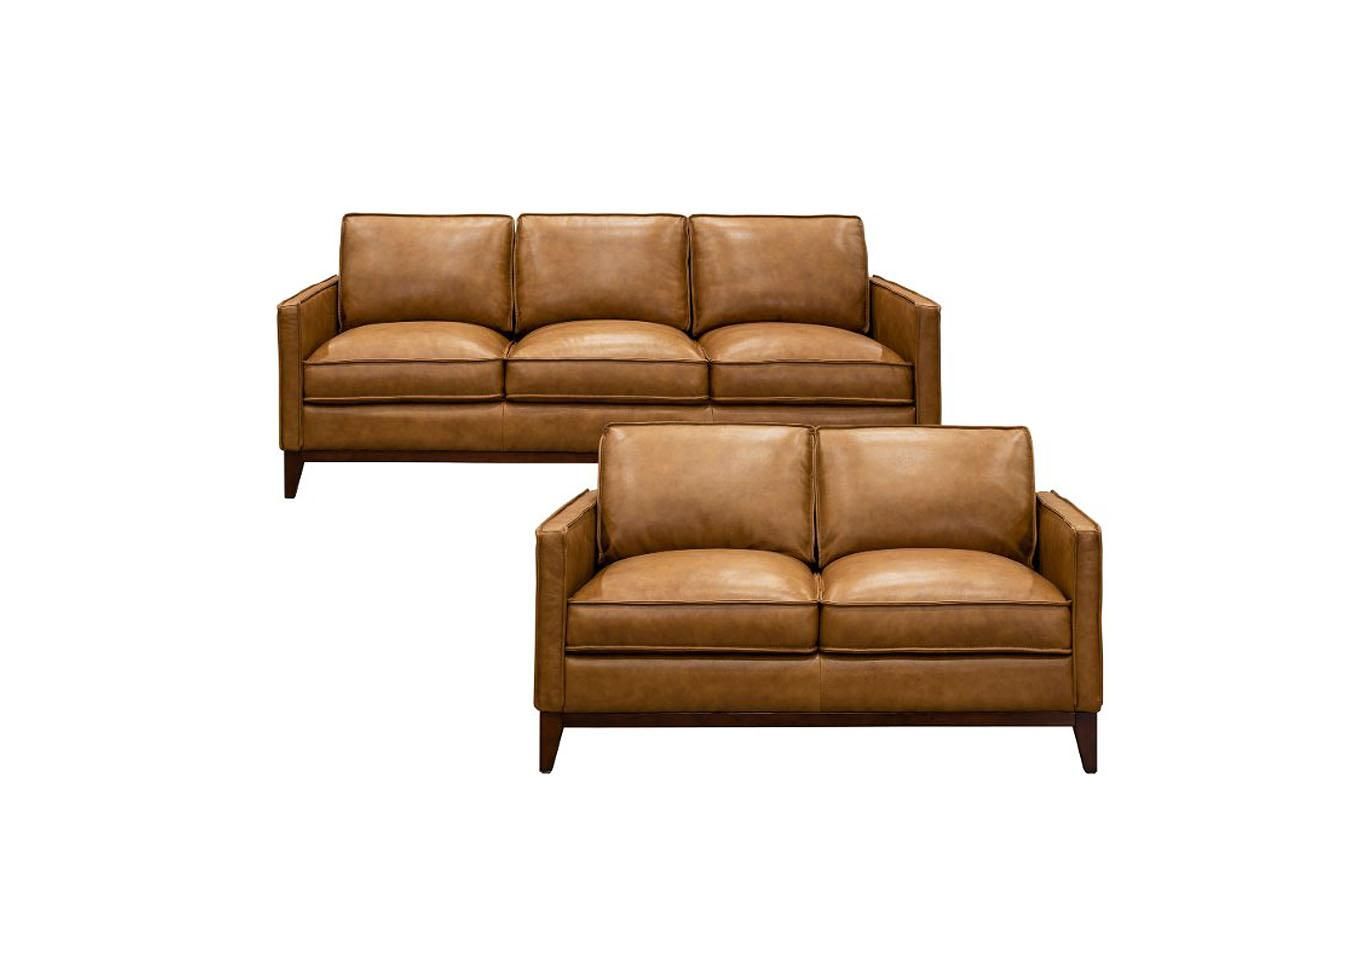 Newport Top Grain Leather Sofa And Love Seat Nader'S Furniture Intended For Top Grain Leather Loveseats (View 12 of 15)